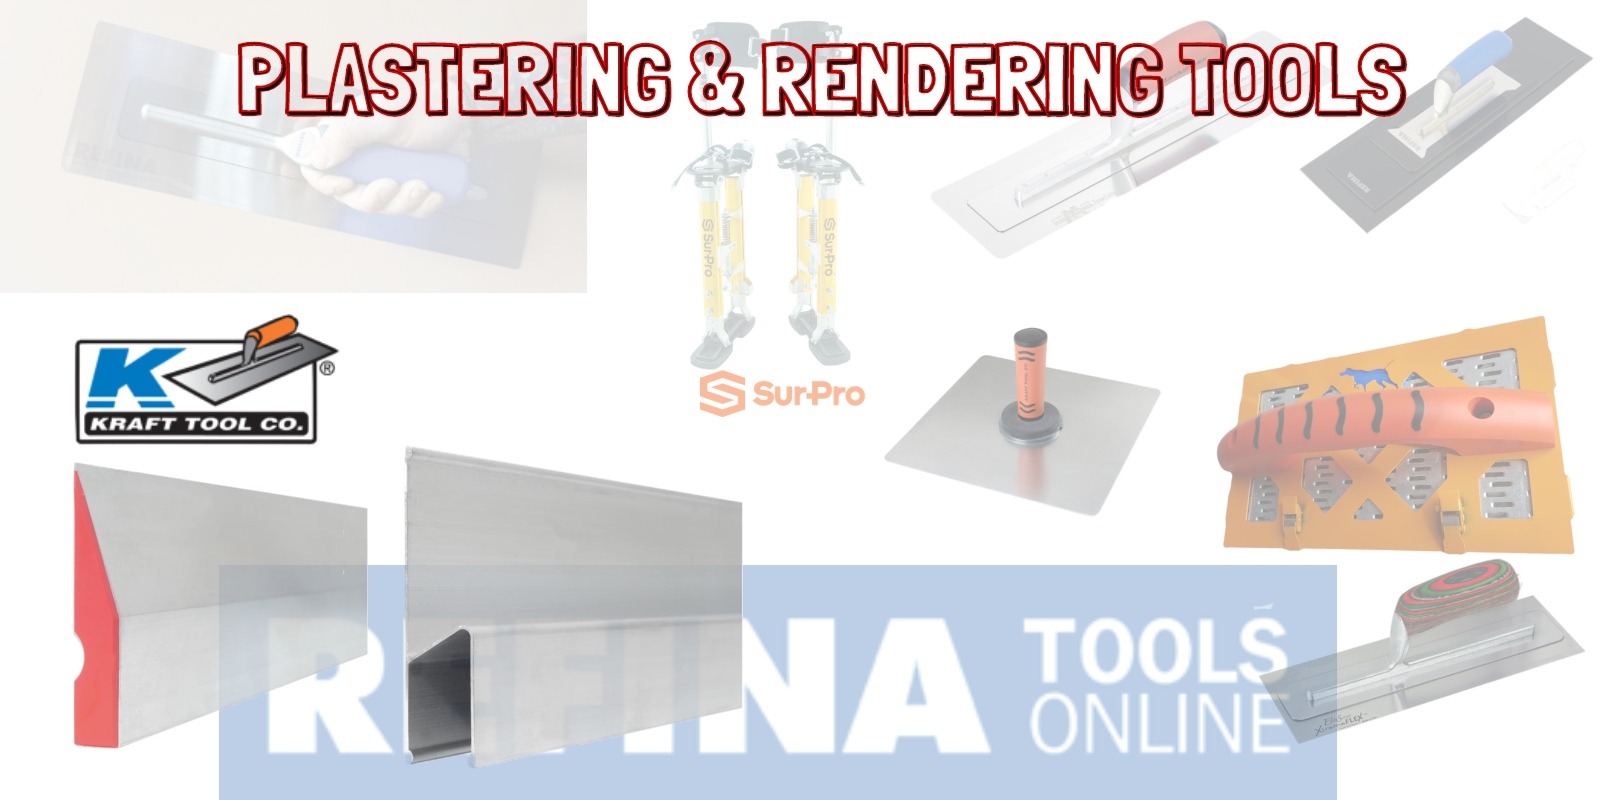 plastering and rendering tools landing page